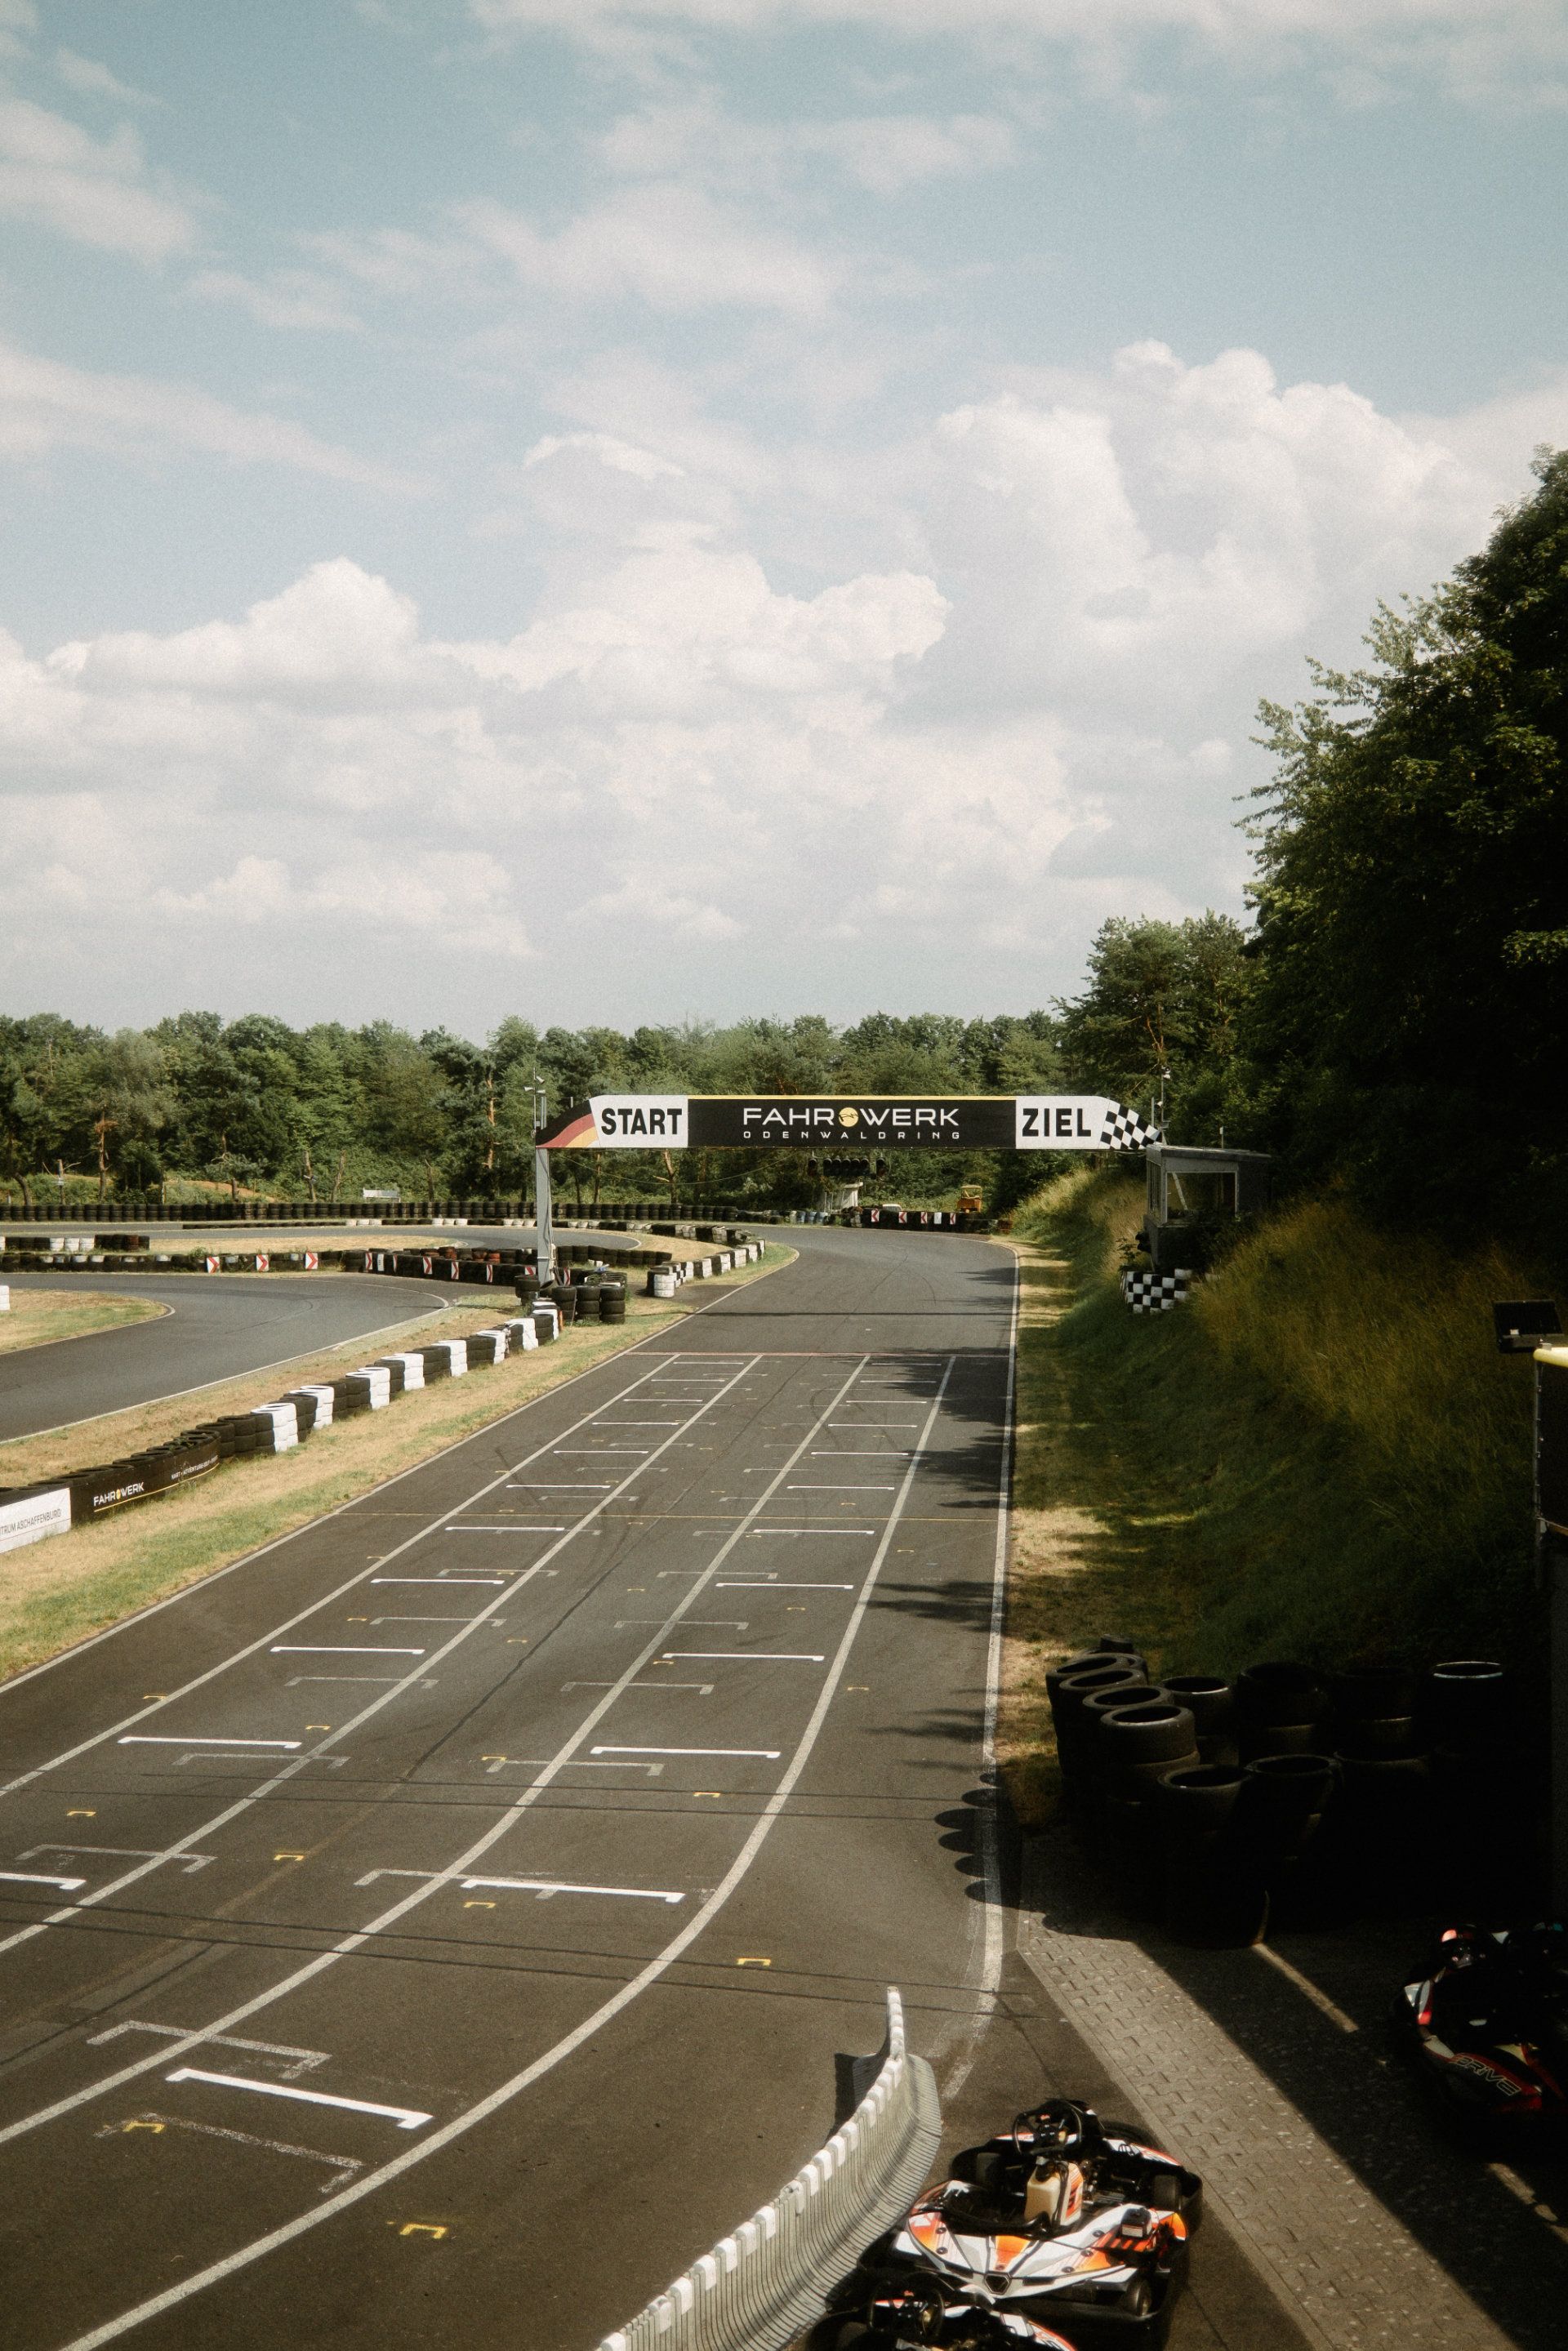 A serene racetrack awaits the thrill of speed, flanked by lush greenery on a sunny day, as go-karts prepare to zip across the start-finish line, captured through the lens